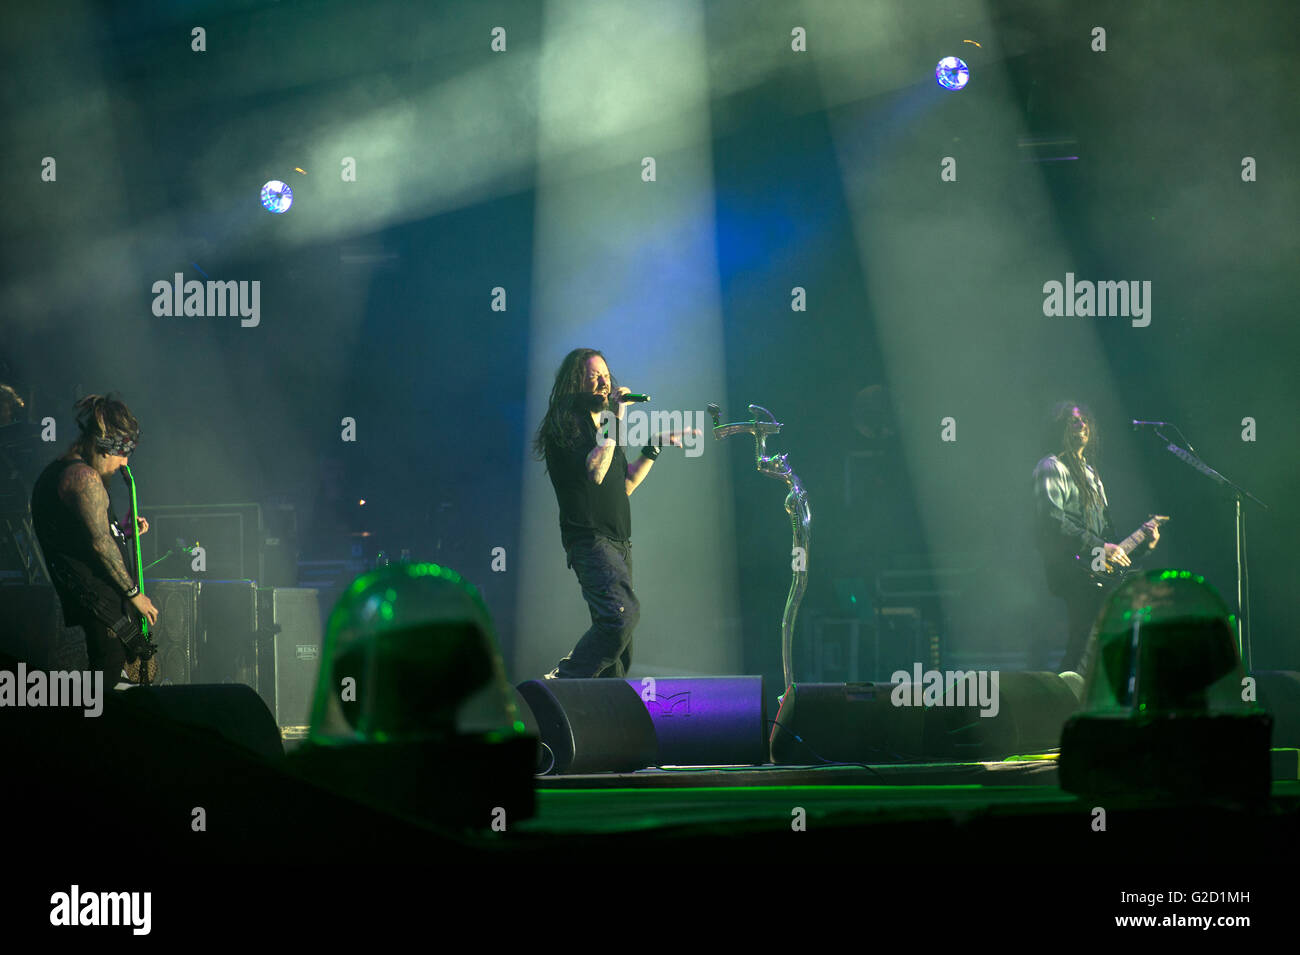 Lisbon, Portugal. 27th May, 2016. Korn performance in Rock in Rio 2016 Lisbon, the Nu Metal band from California present a good performance with 50.000 people. Lisbon, Portugal. On May 27, 2016 (Photo by Gonçalo Silva) Credit:  Gonçalo Silva/Alamy Live News Stock Photo